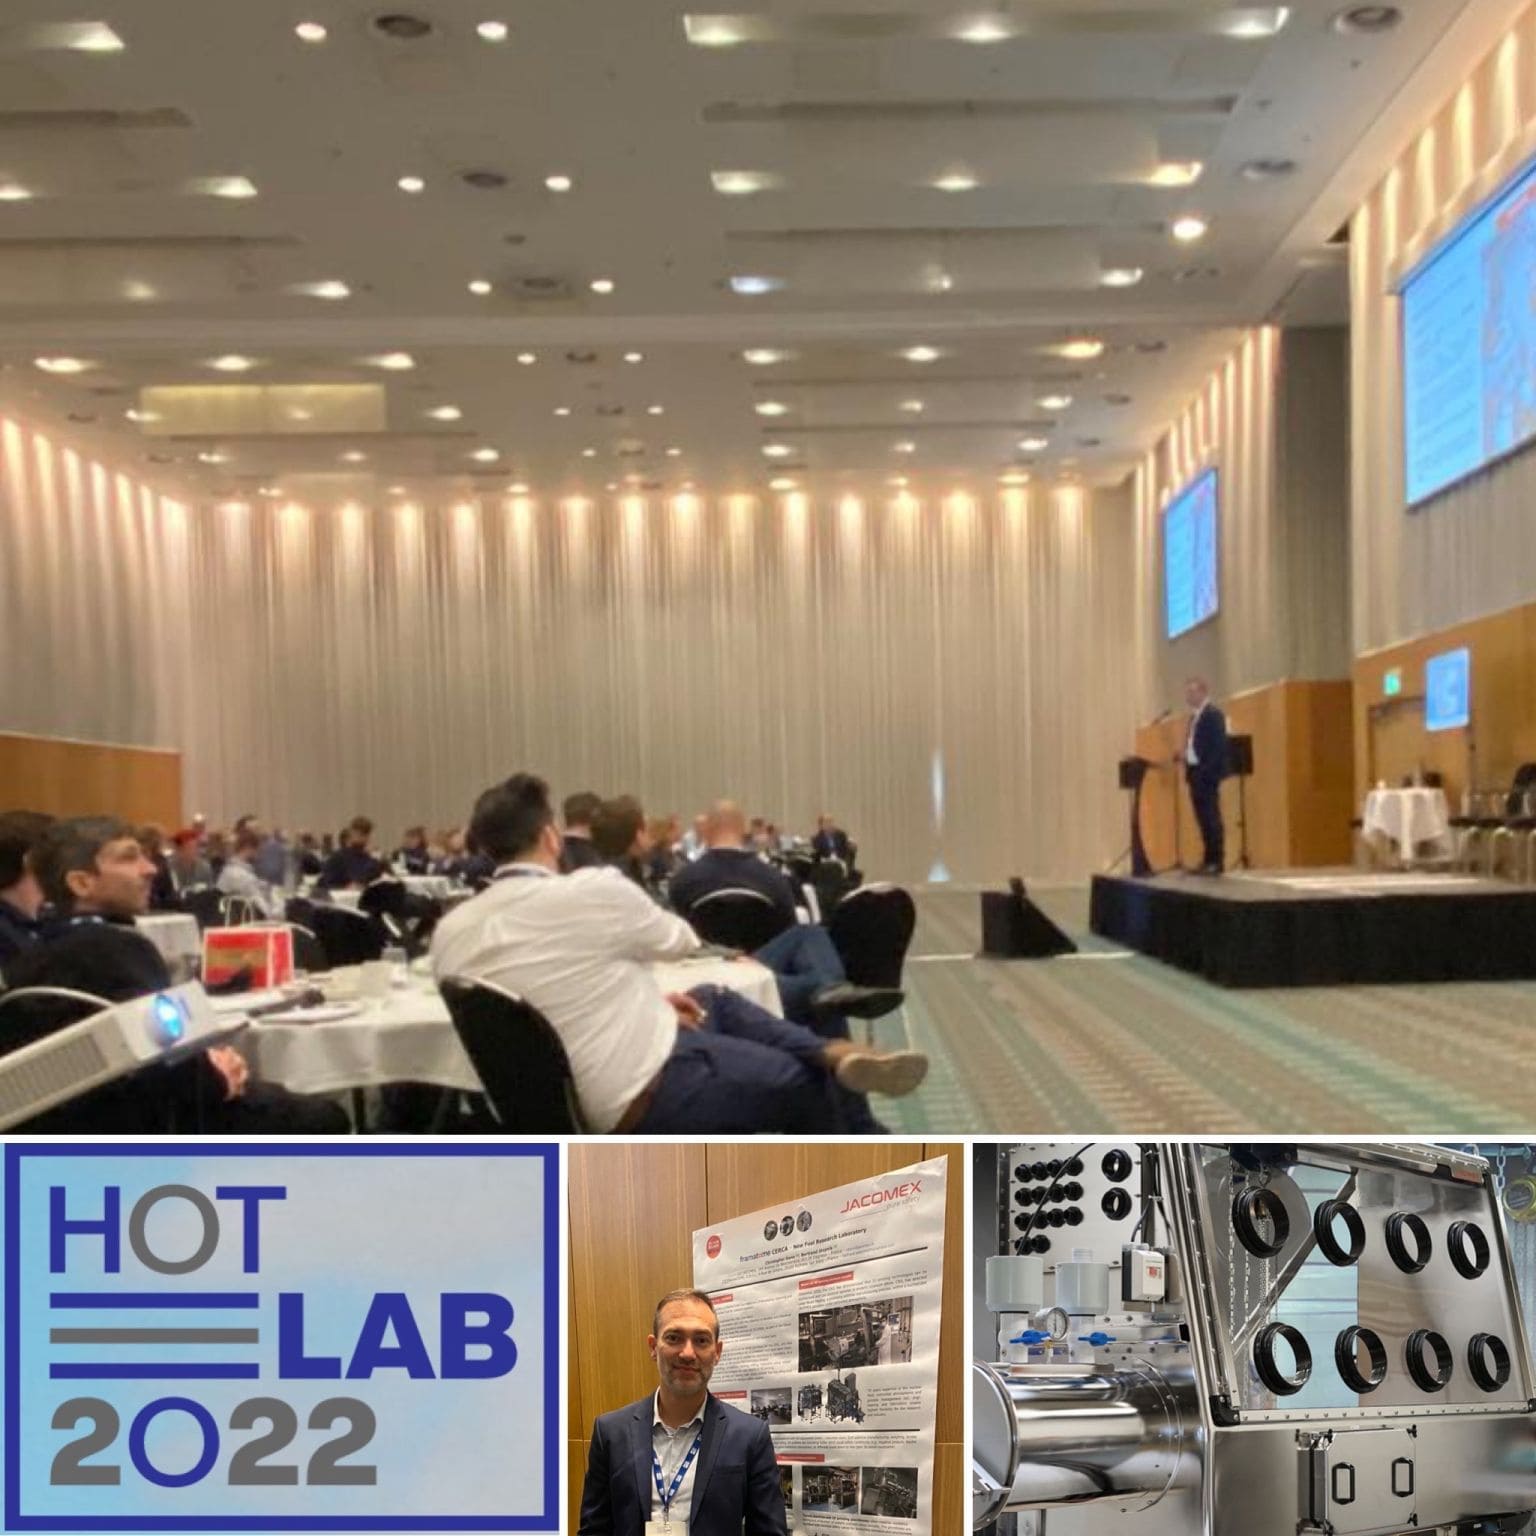 An attendance record for HOTLAB 2022 organized by NNL